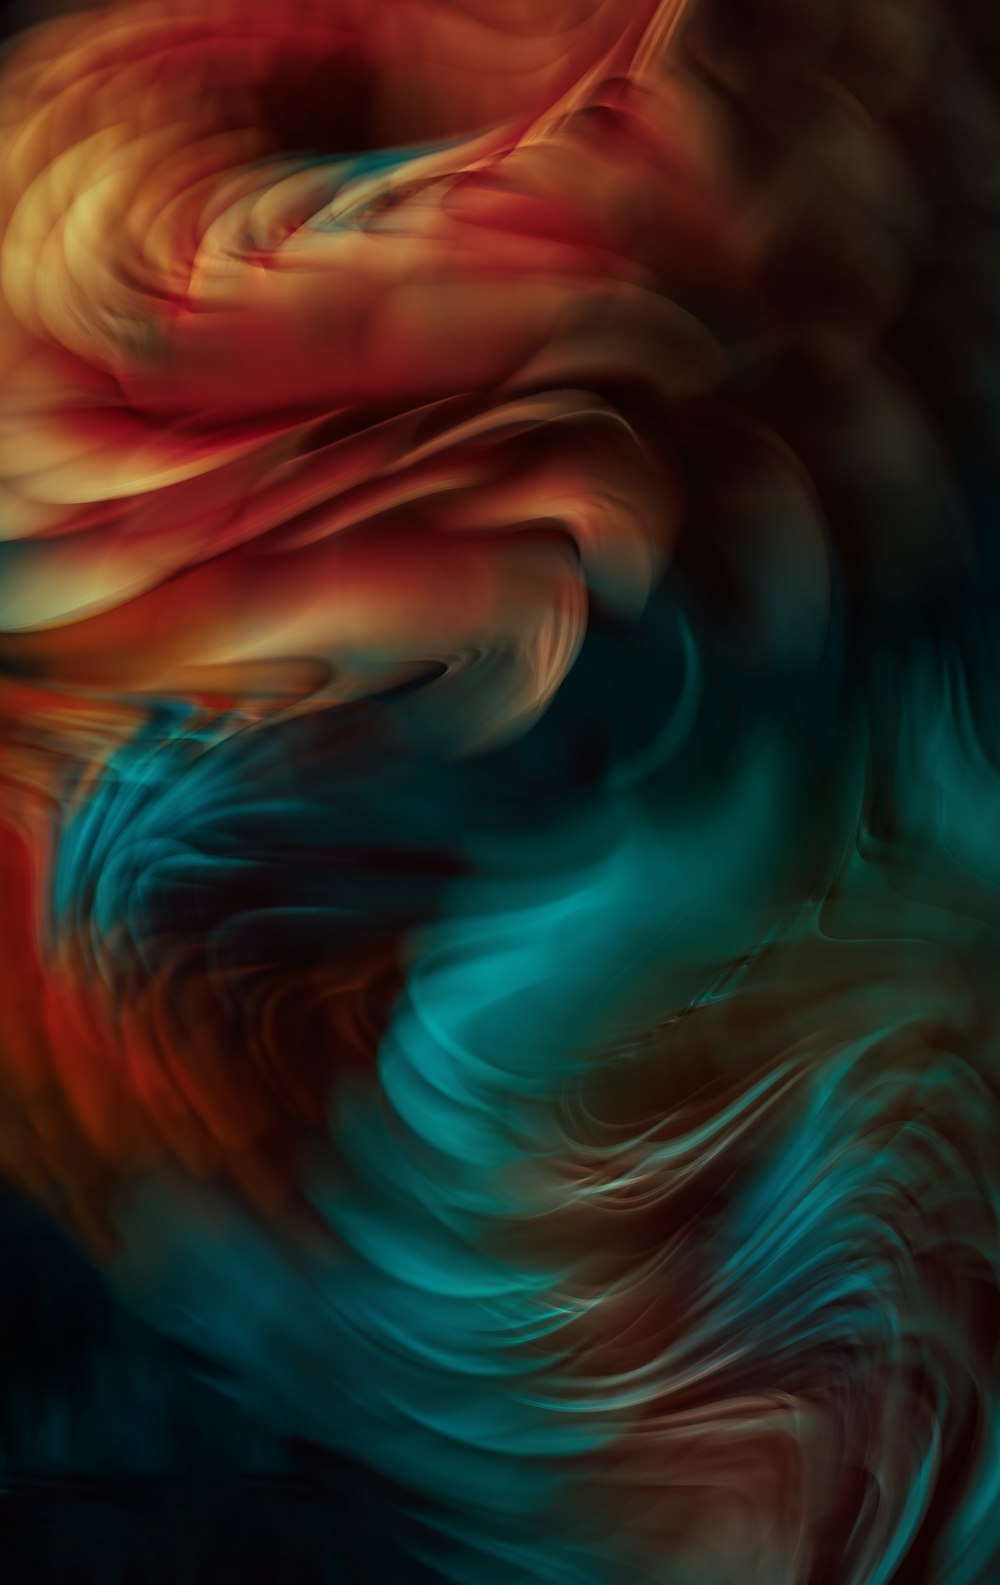 an abstract painting of a red, orange, and blue swirl